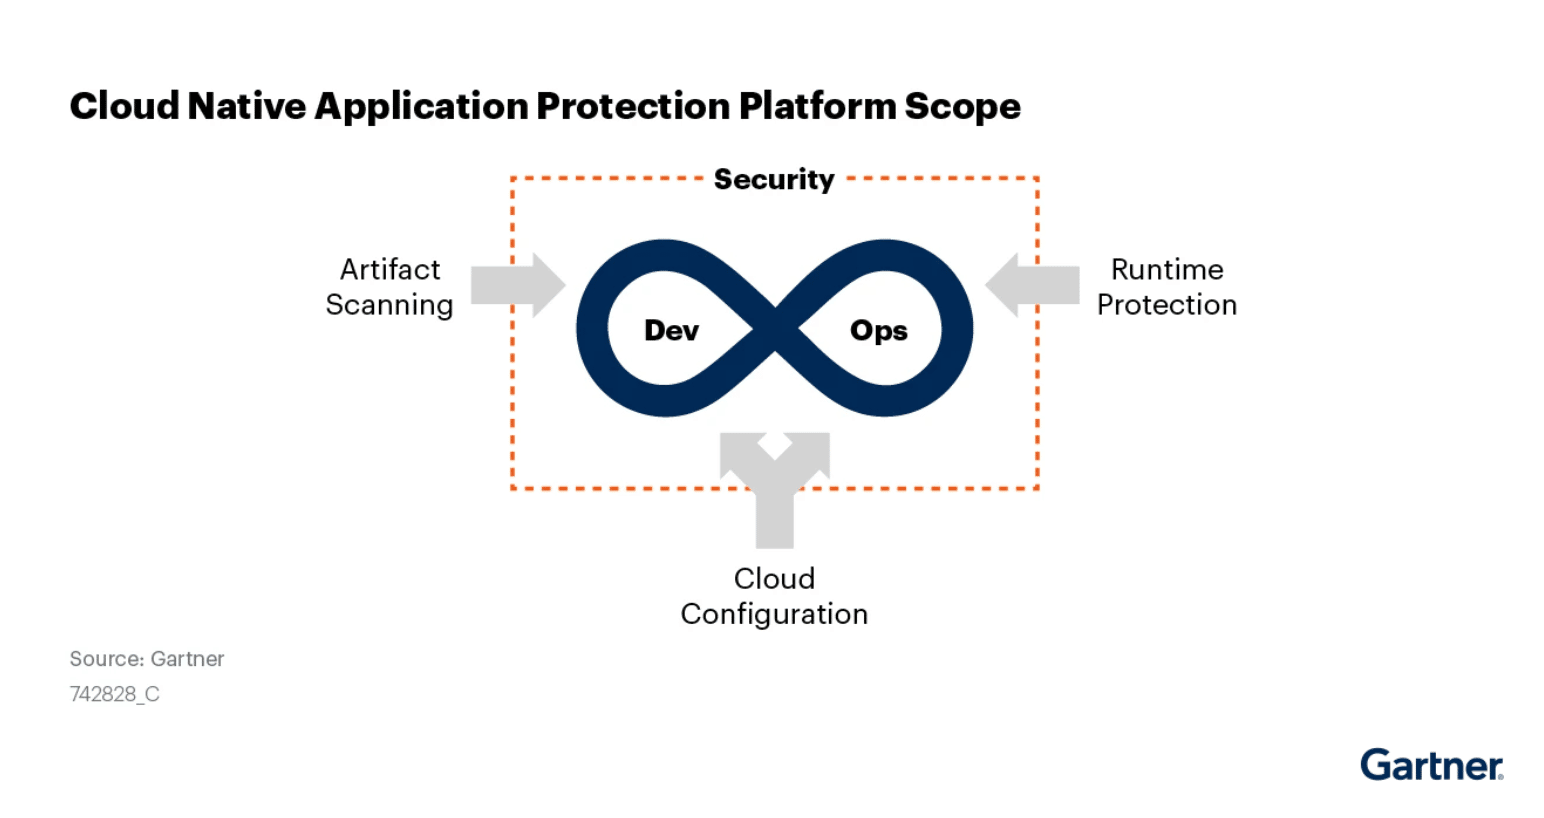 Graphic shows the multiple aspects of CNAPP scope: artifact scanning, runtime protection, and cloud configuration.